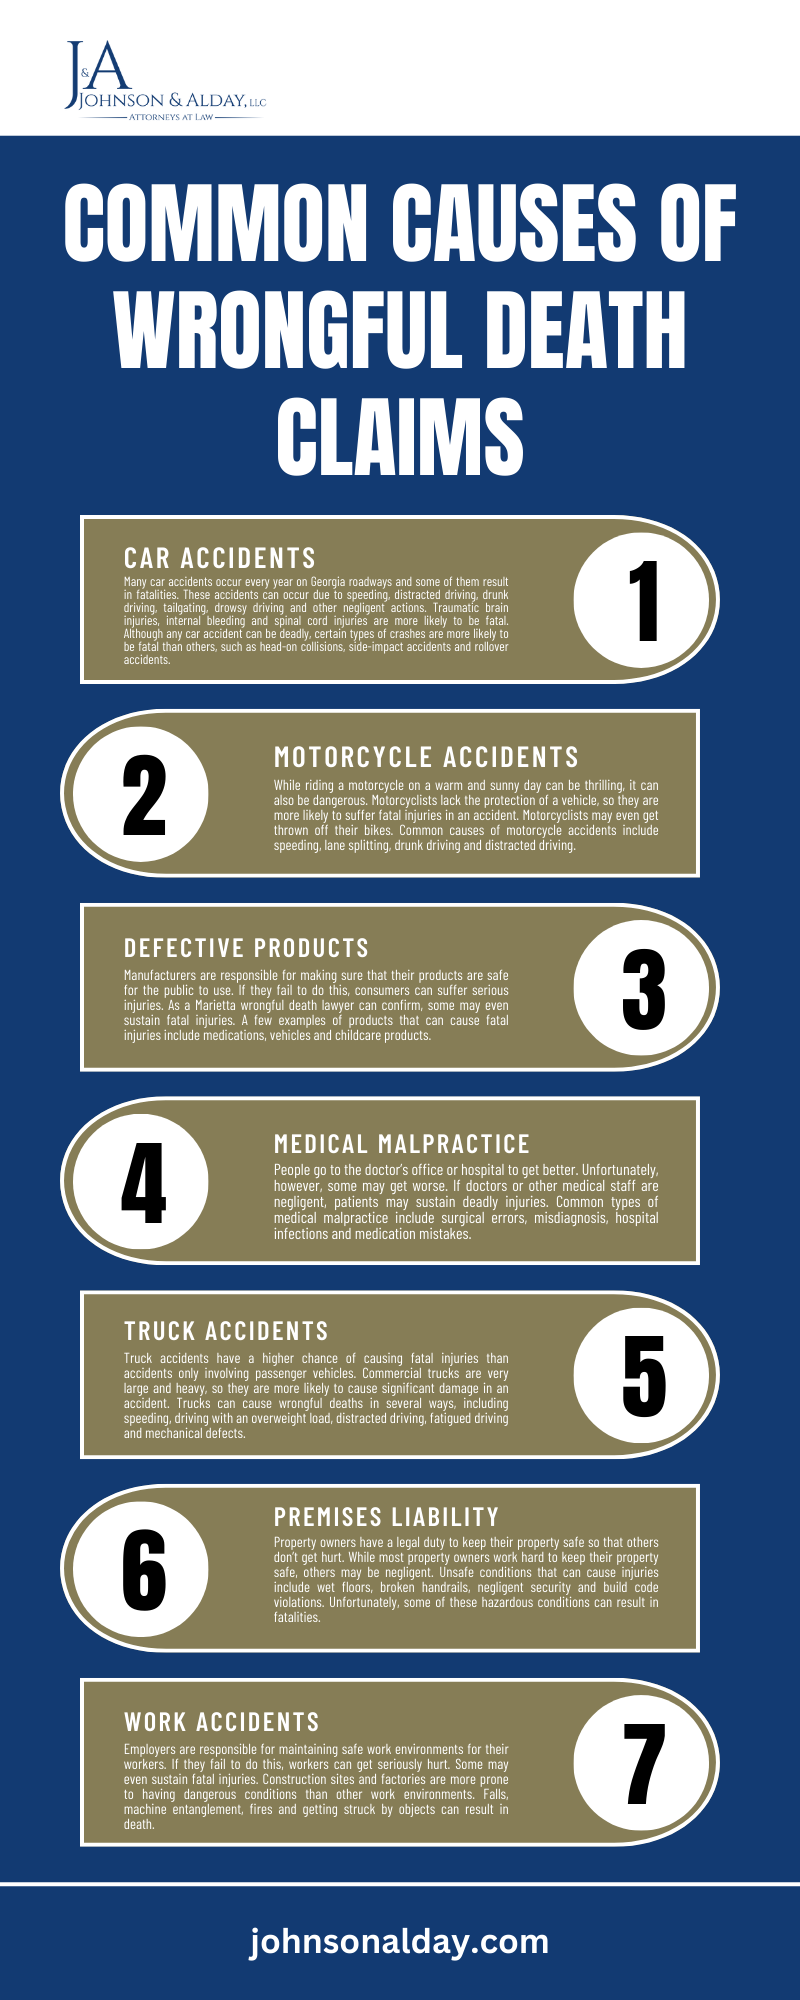 COMMON CAUSES OF WRONGFUL DEATH CLAIMS INFOGRAPHIC